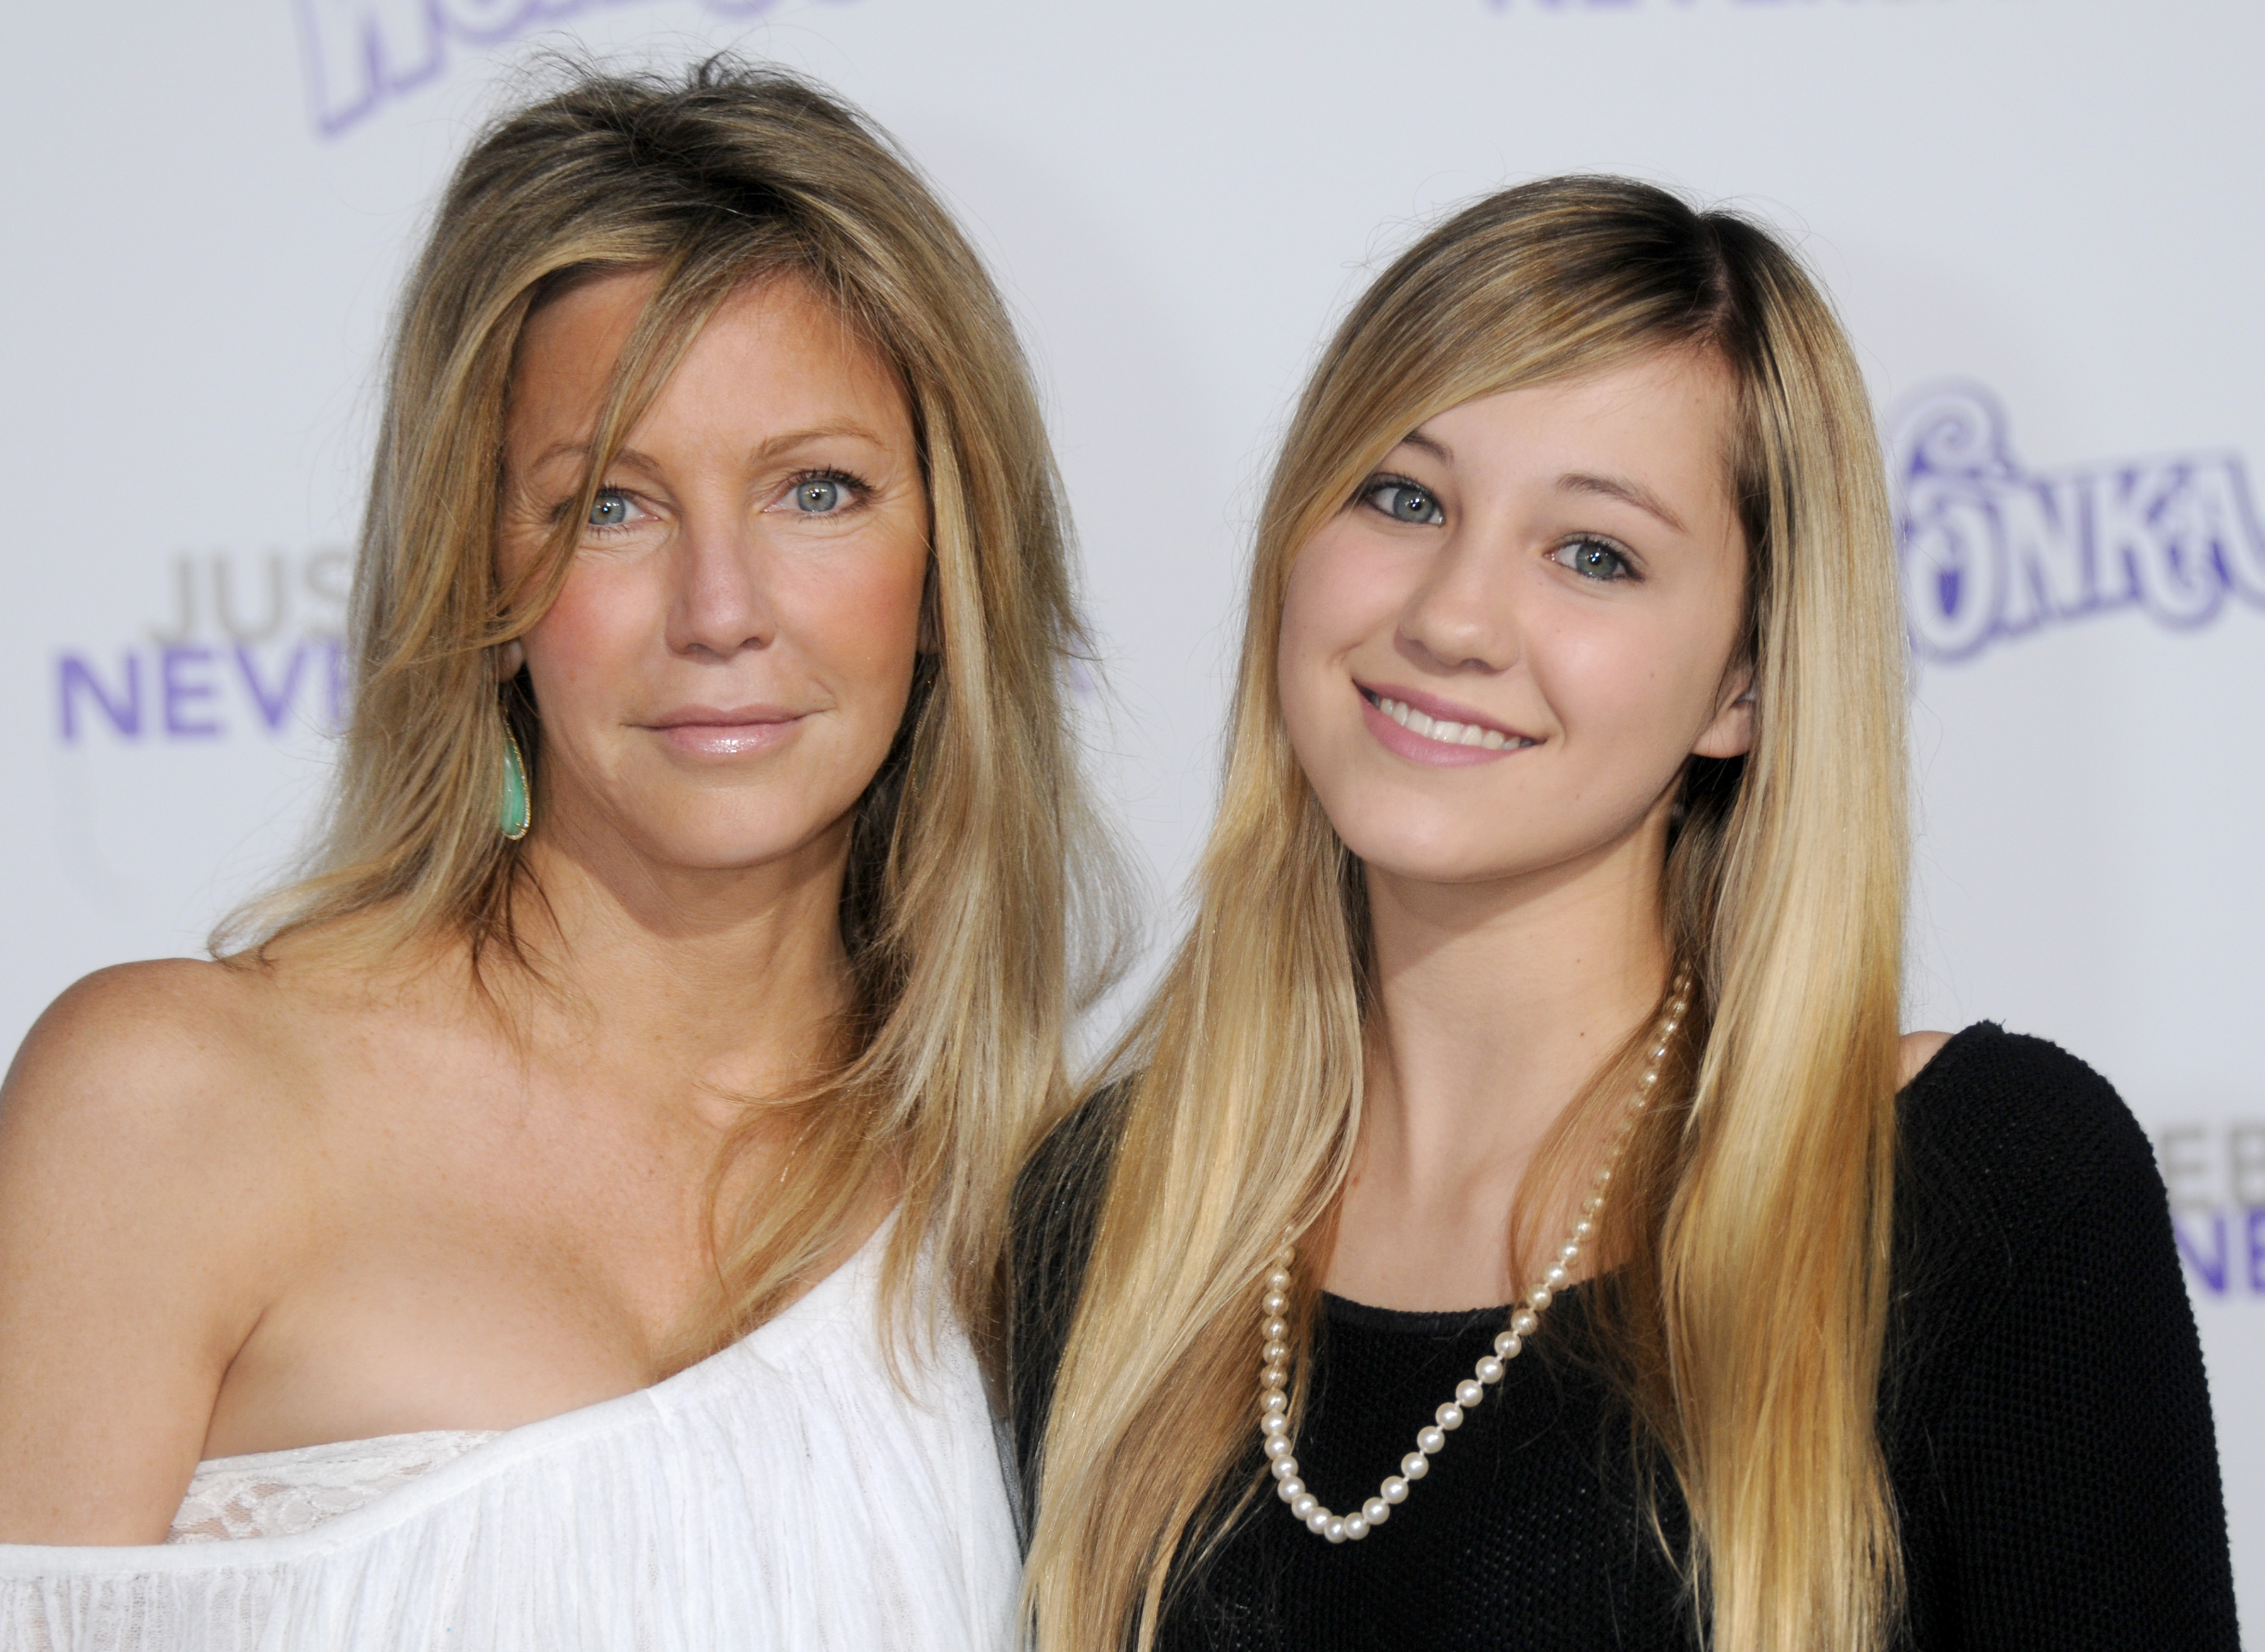 Heather Locklear and Ava Sambora at the Los Angeles Premiere of "Justin Bieber: Never Say Never" at the Nokia Theater L.A. Live on February 8, 2011 | Source: Getty Images